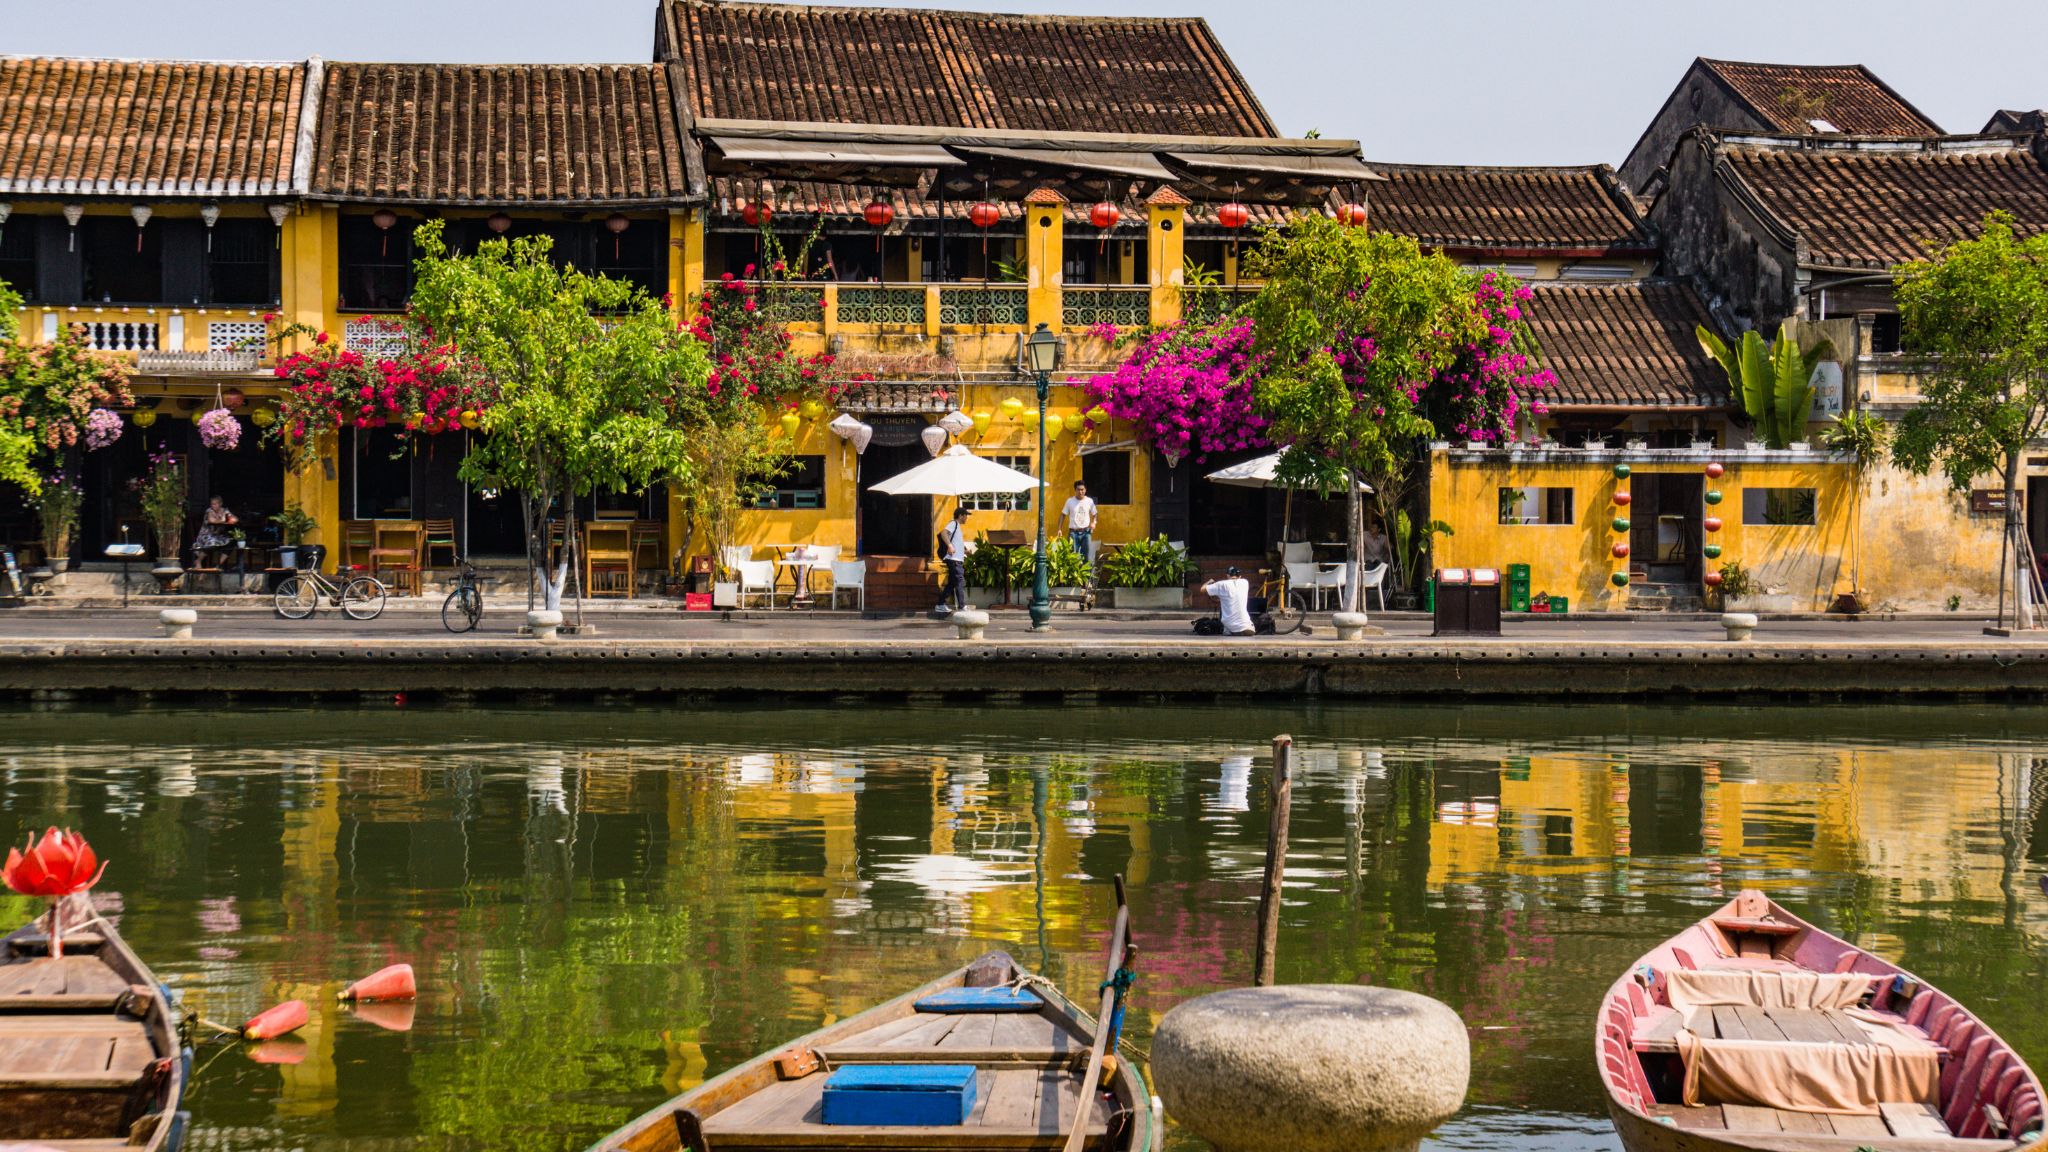 Day 5 Feel Free To Explore The Hidden Gems In Hoi An